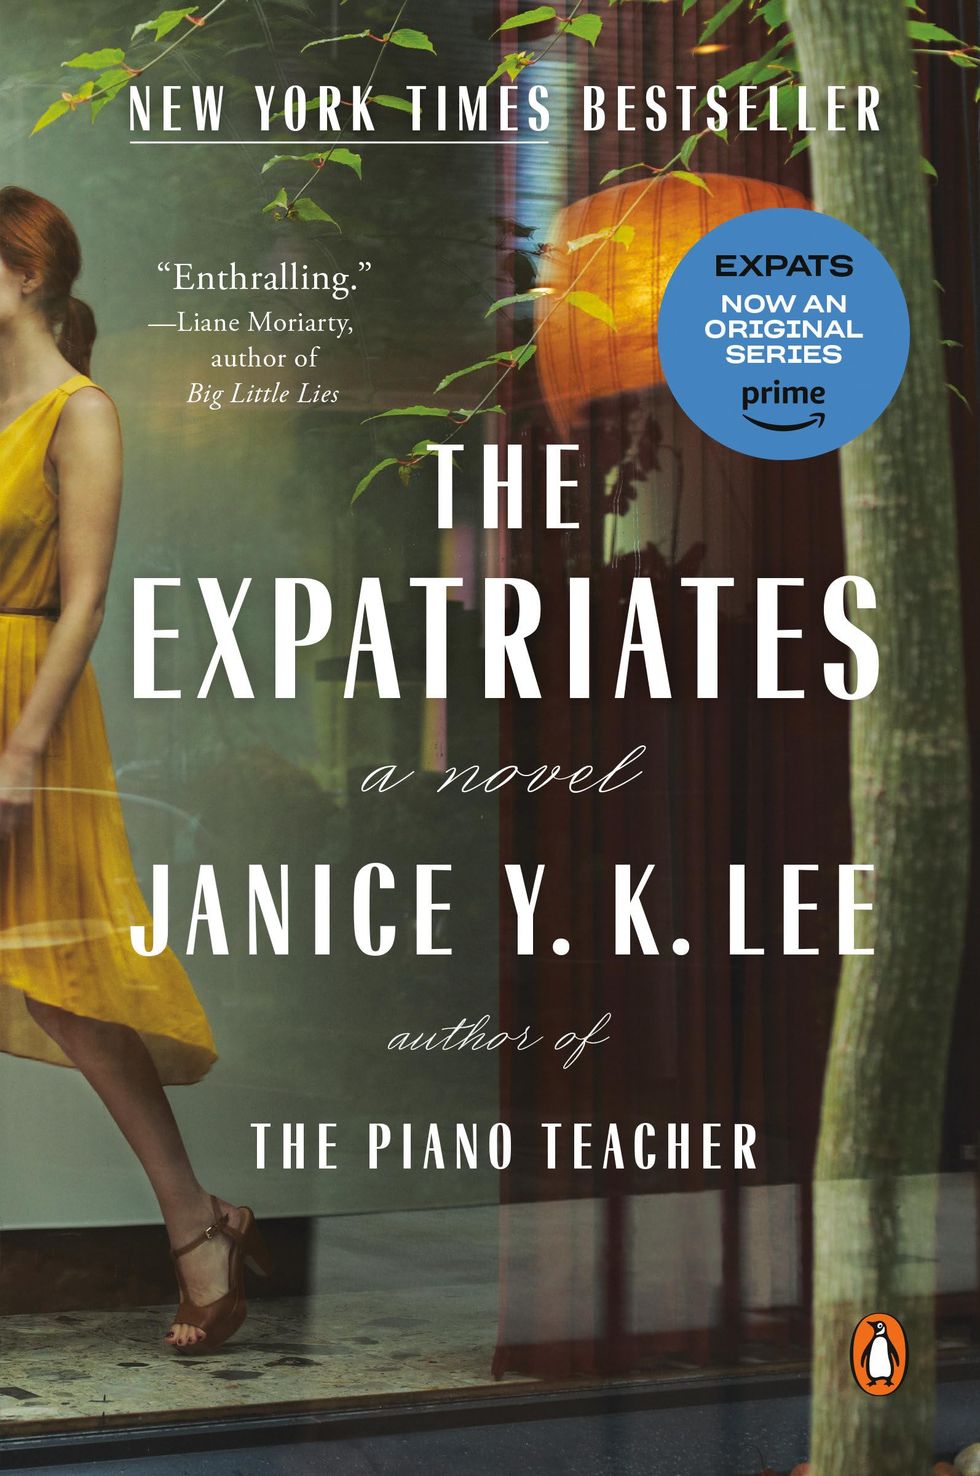 The Expatriates: A Current